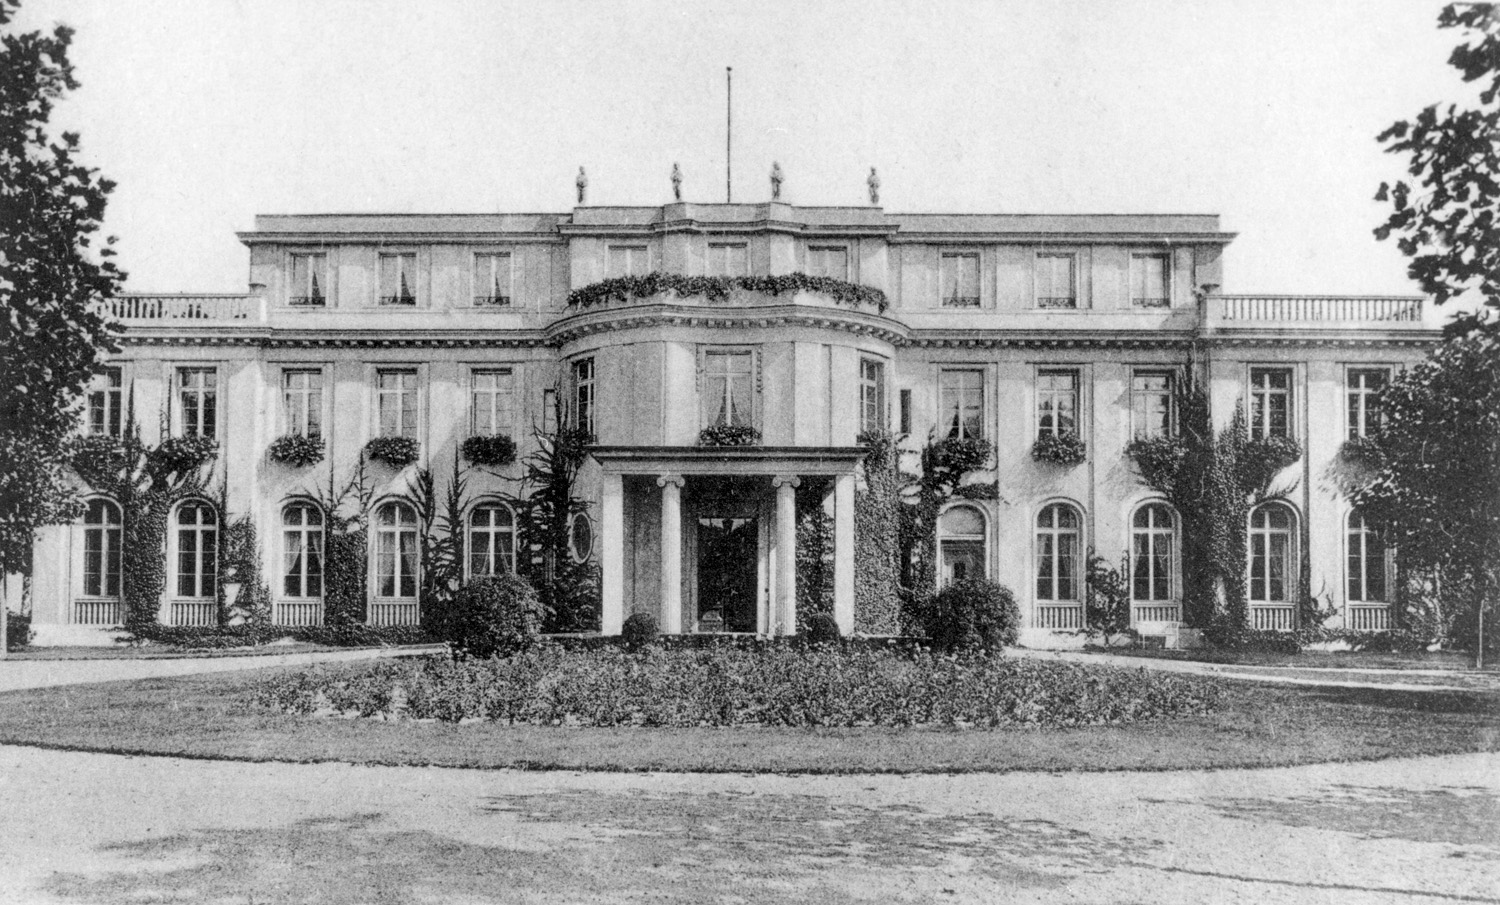 This estate in the suburbs of Berlin was the location of the infamous Wannsee Conference where Nazi leaders gathered to discuss the Final Solution to the Jewish Question. 